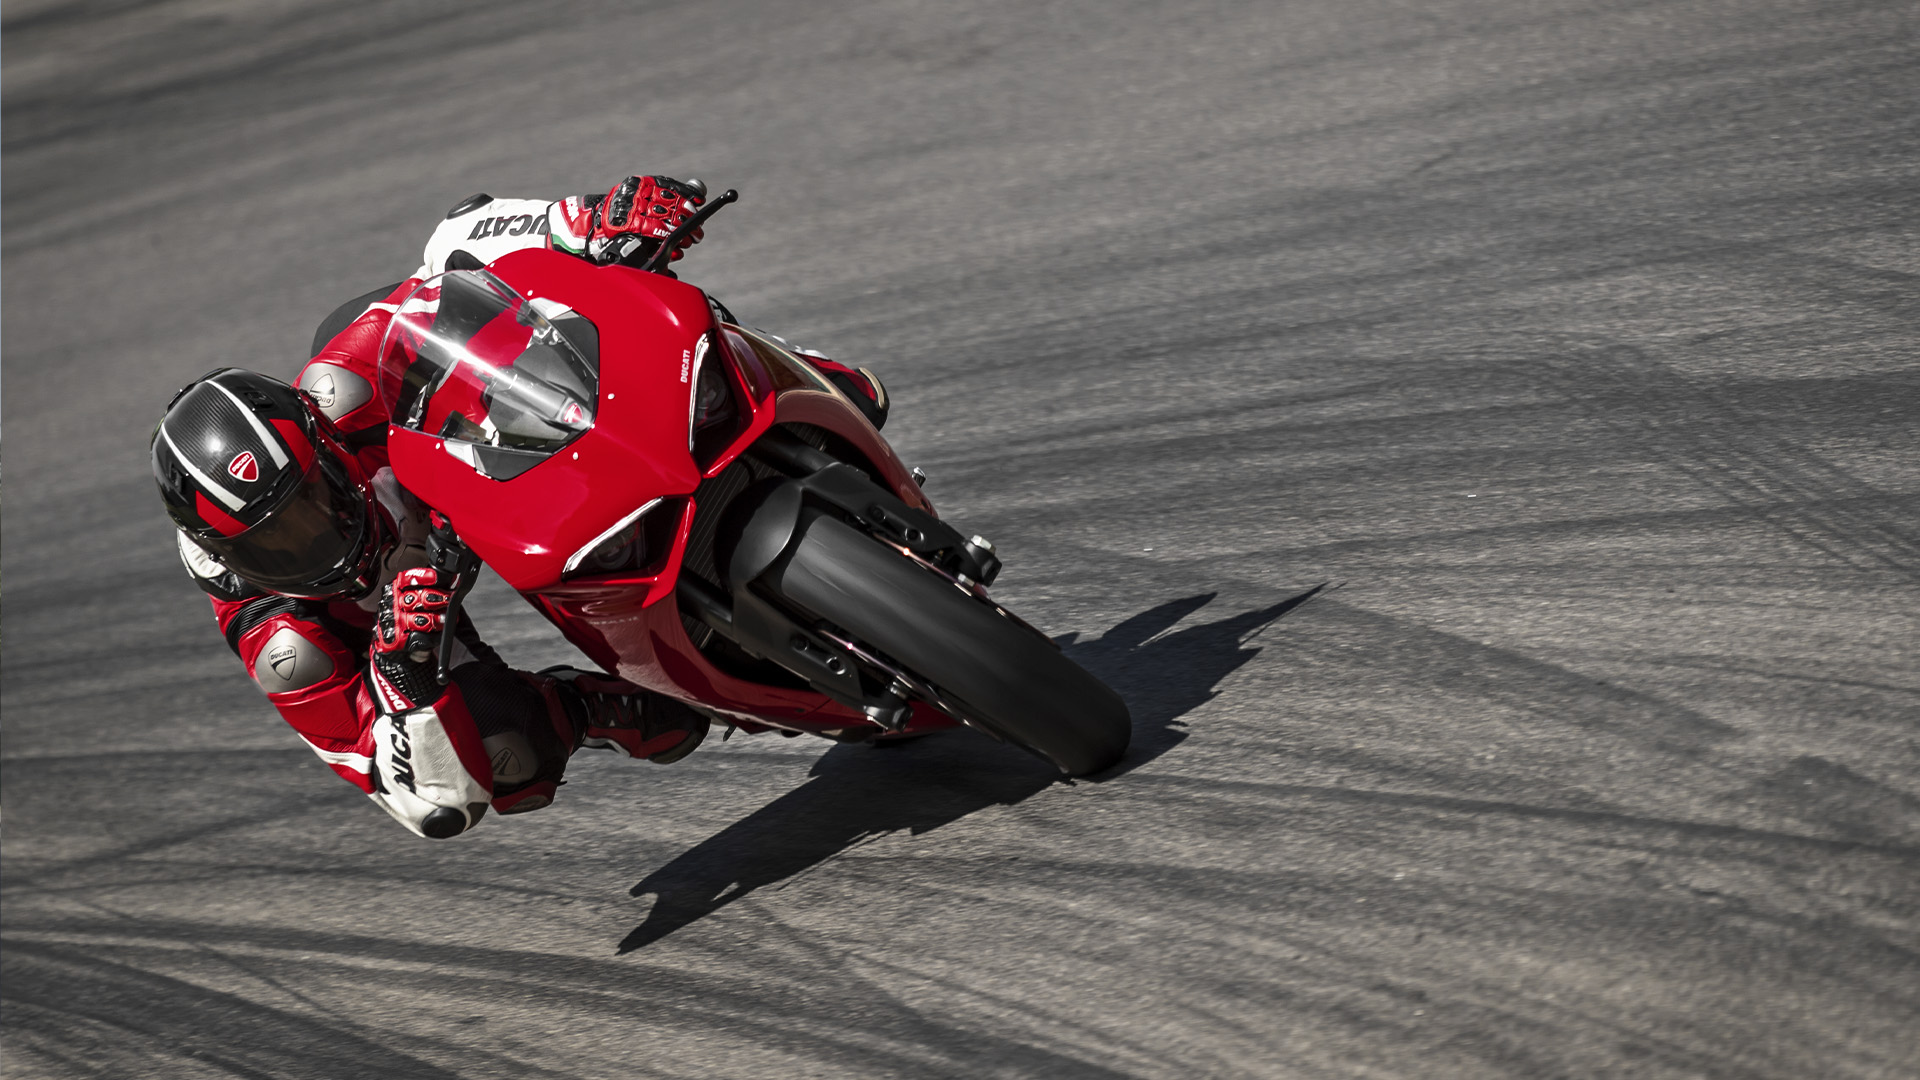 Panigale-V2-overview-gallery-05-1920x1080